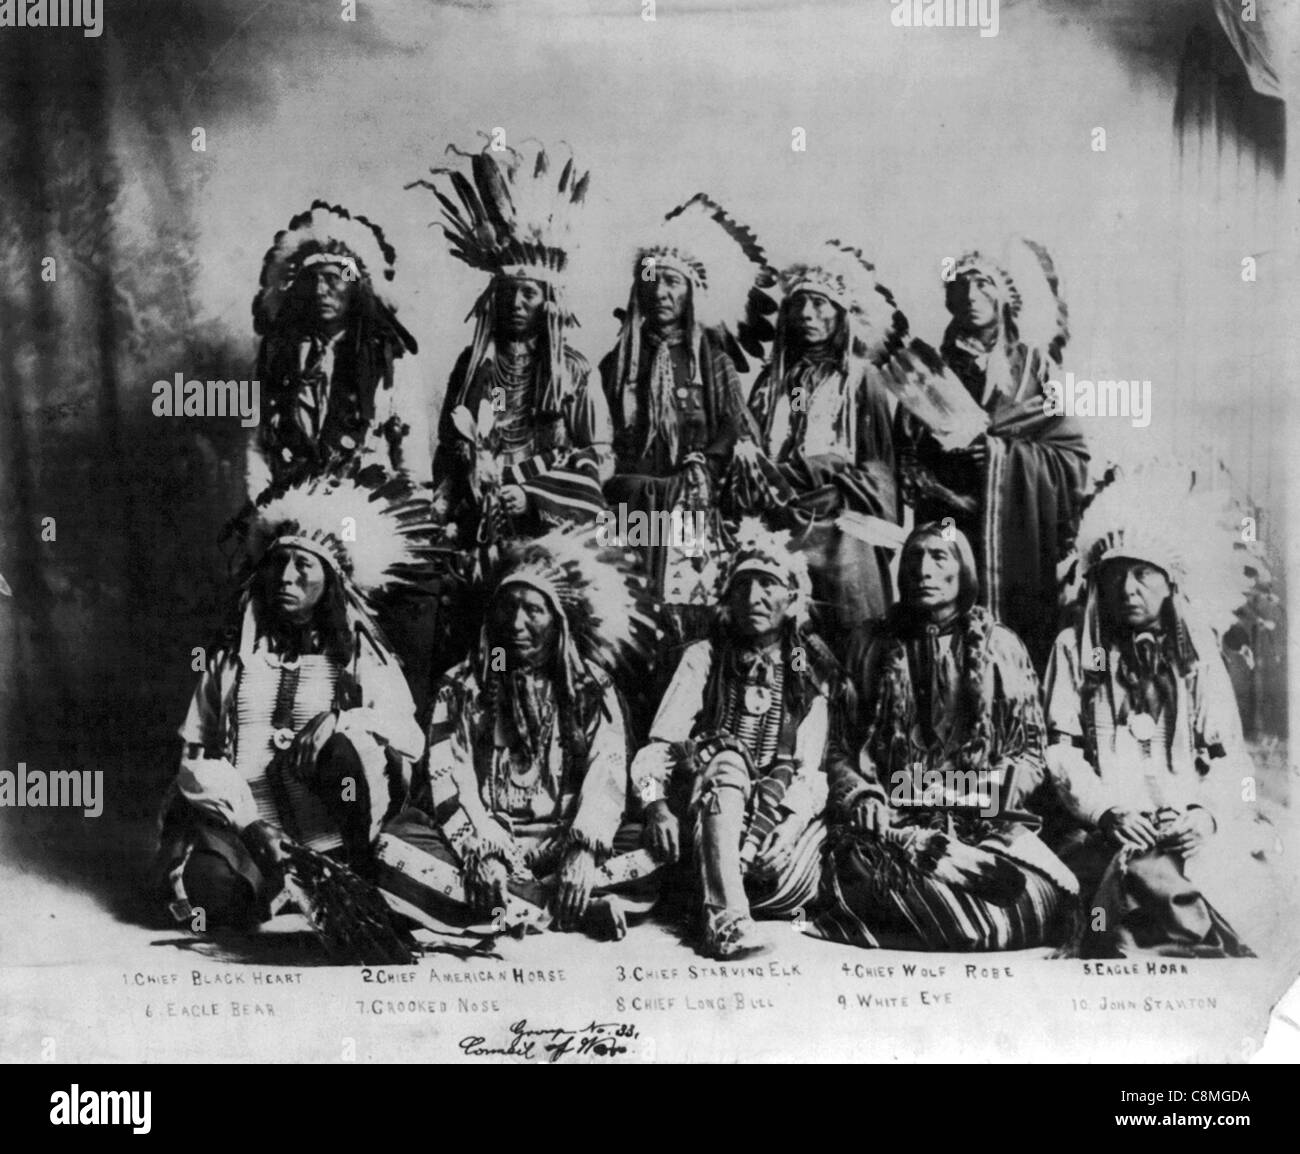 and chiefs - Alamy Historical images indian stock photography hi-res